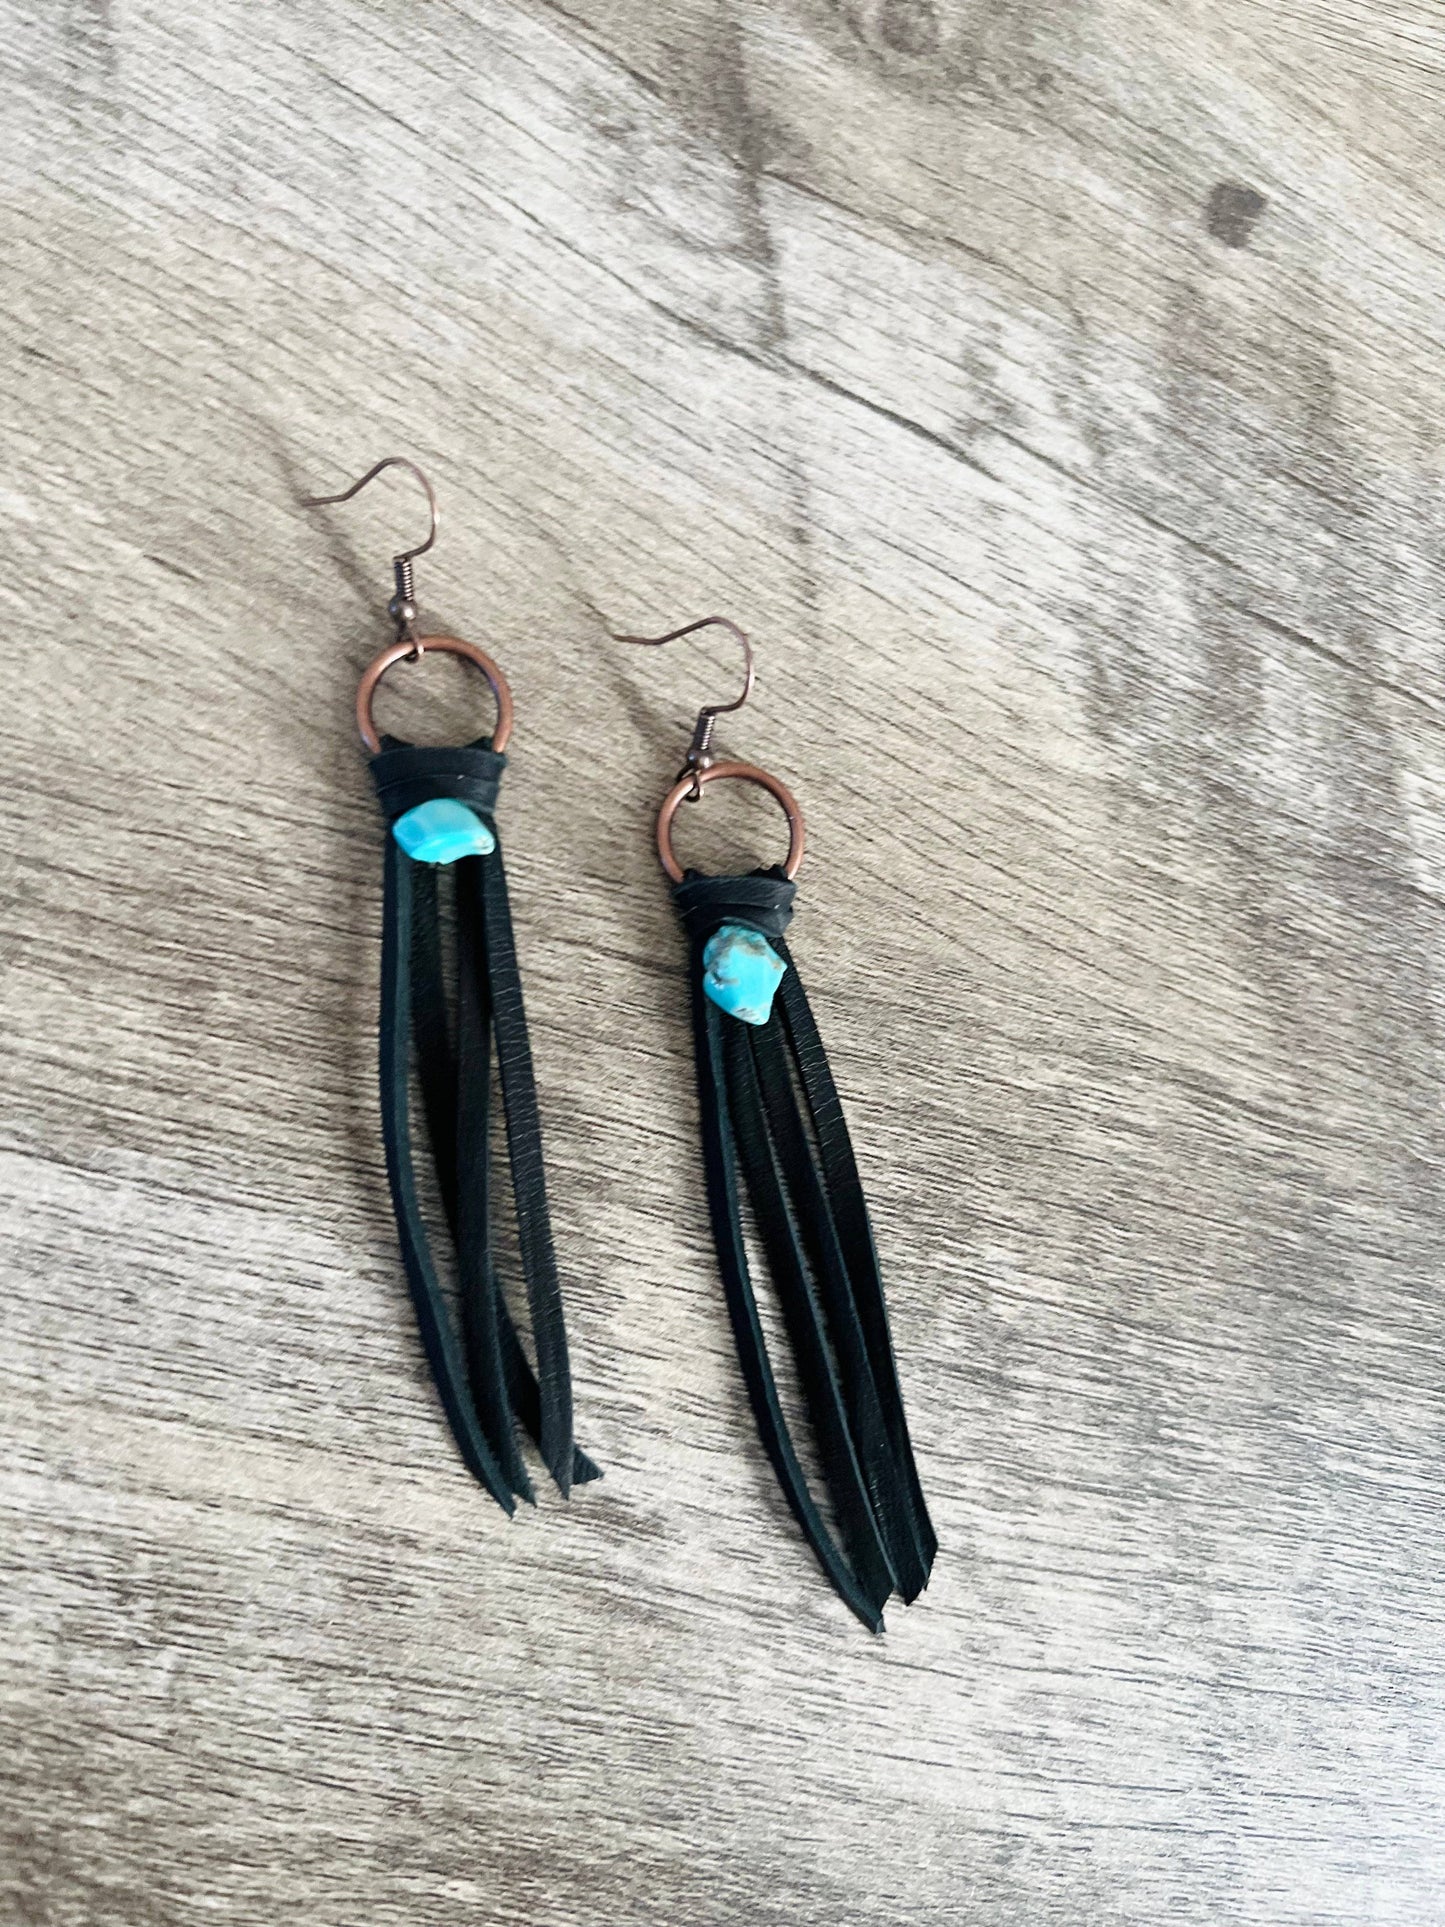 Darby Tassel Earrings, black with turquoise stone